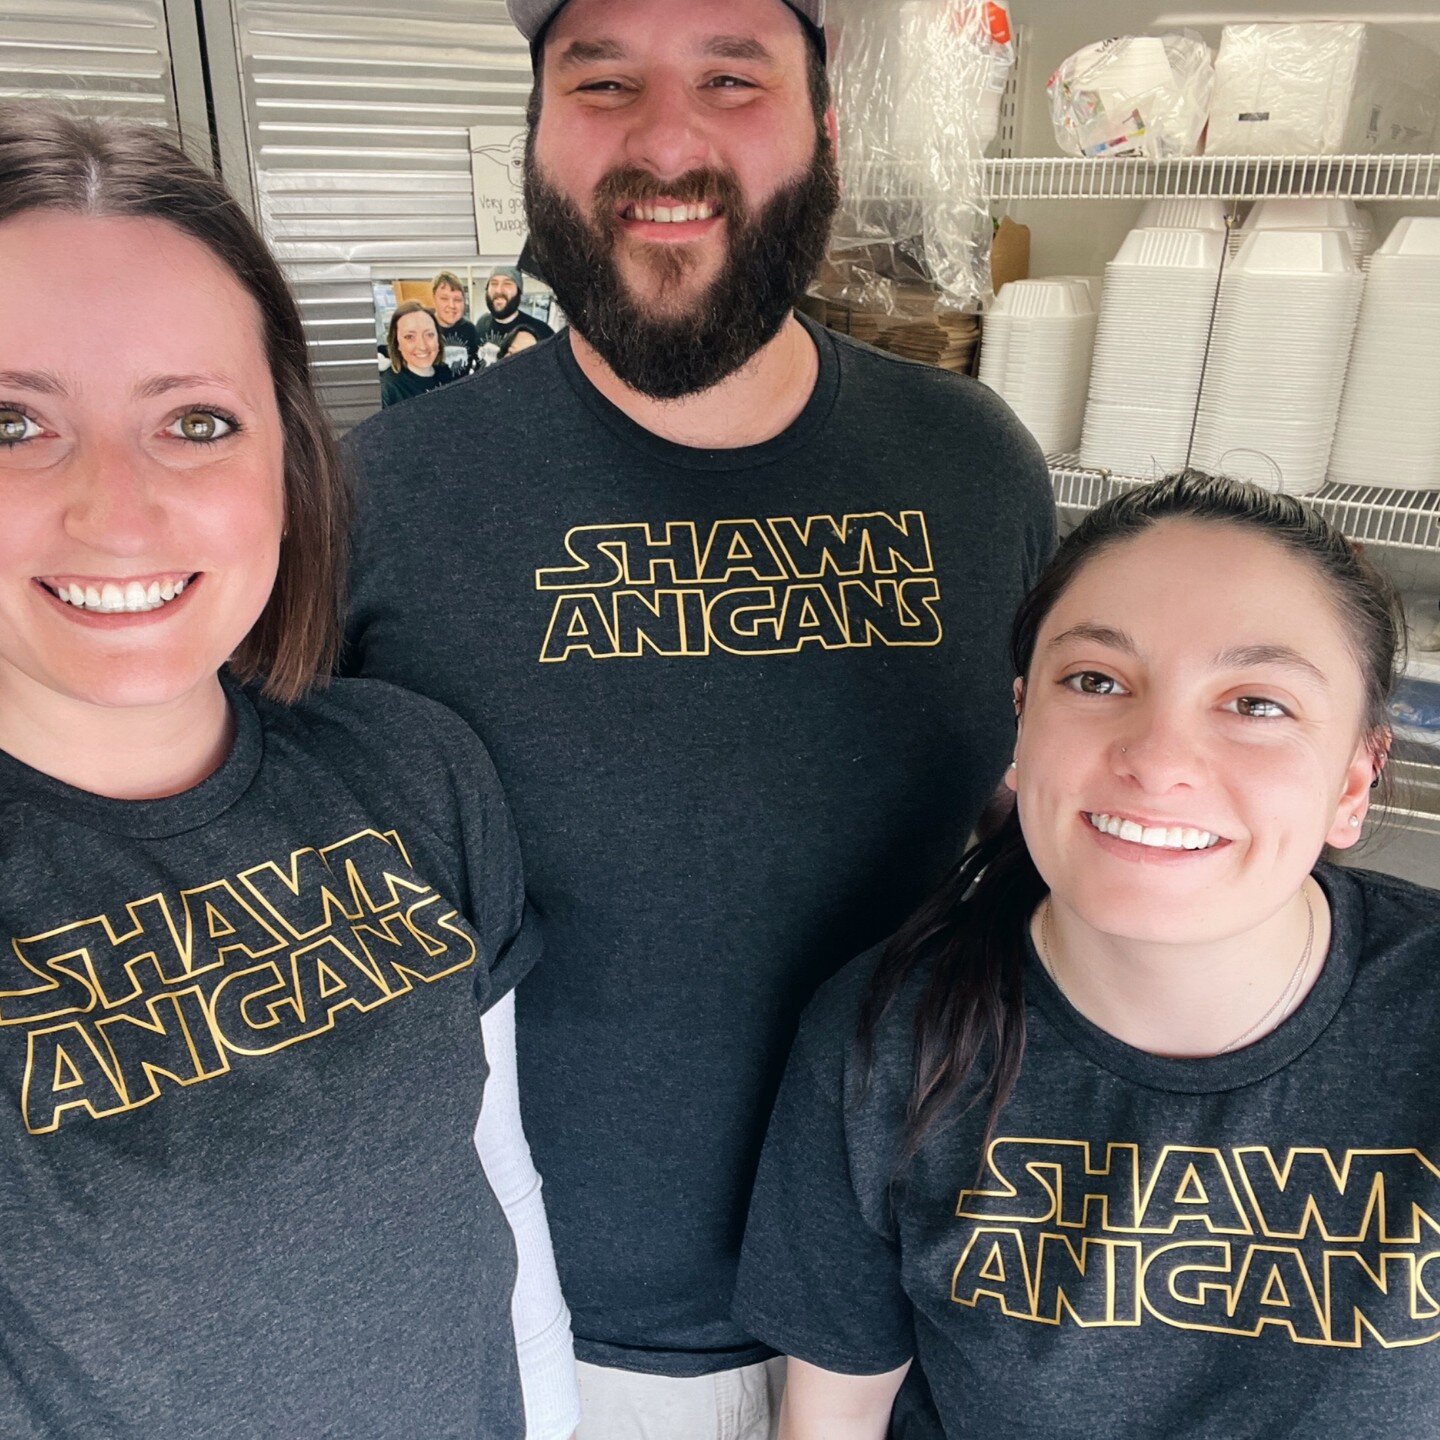 We're posting this week about things we're especially thankful for in 2022. 

First up: Savannah! 

Savannah is our assistant and we are so thankful for her work throughout this year on the food truck and especially for her willingness to work big ev